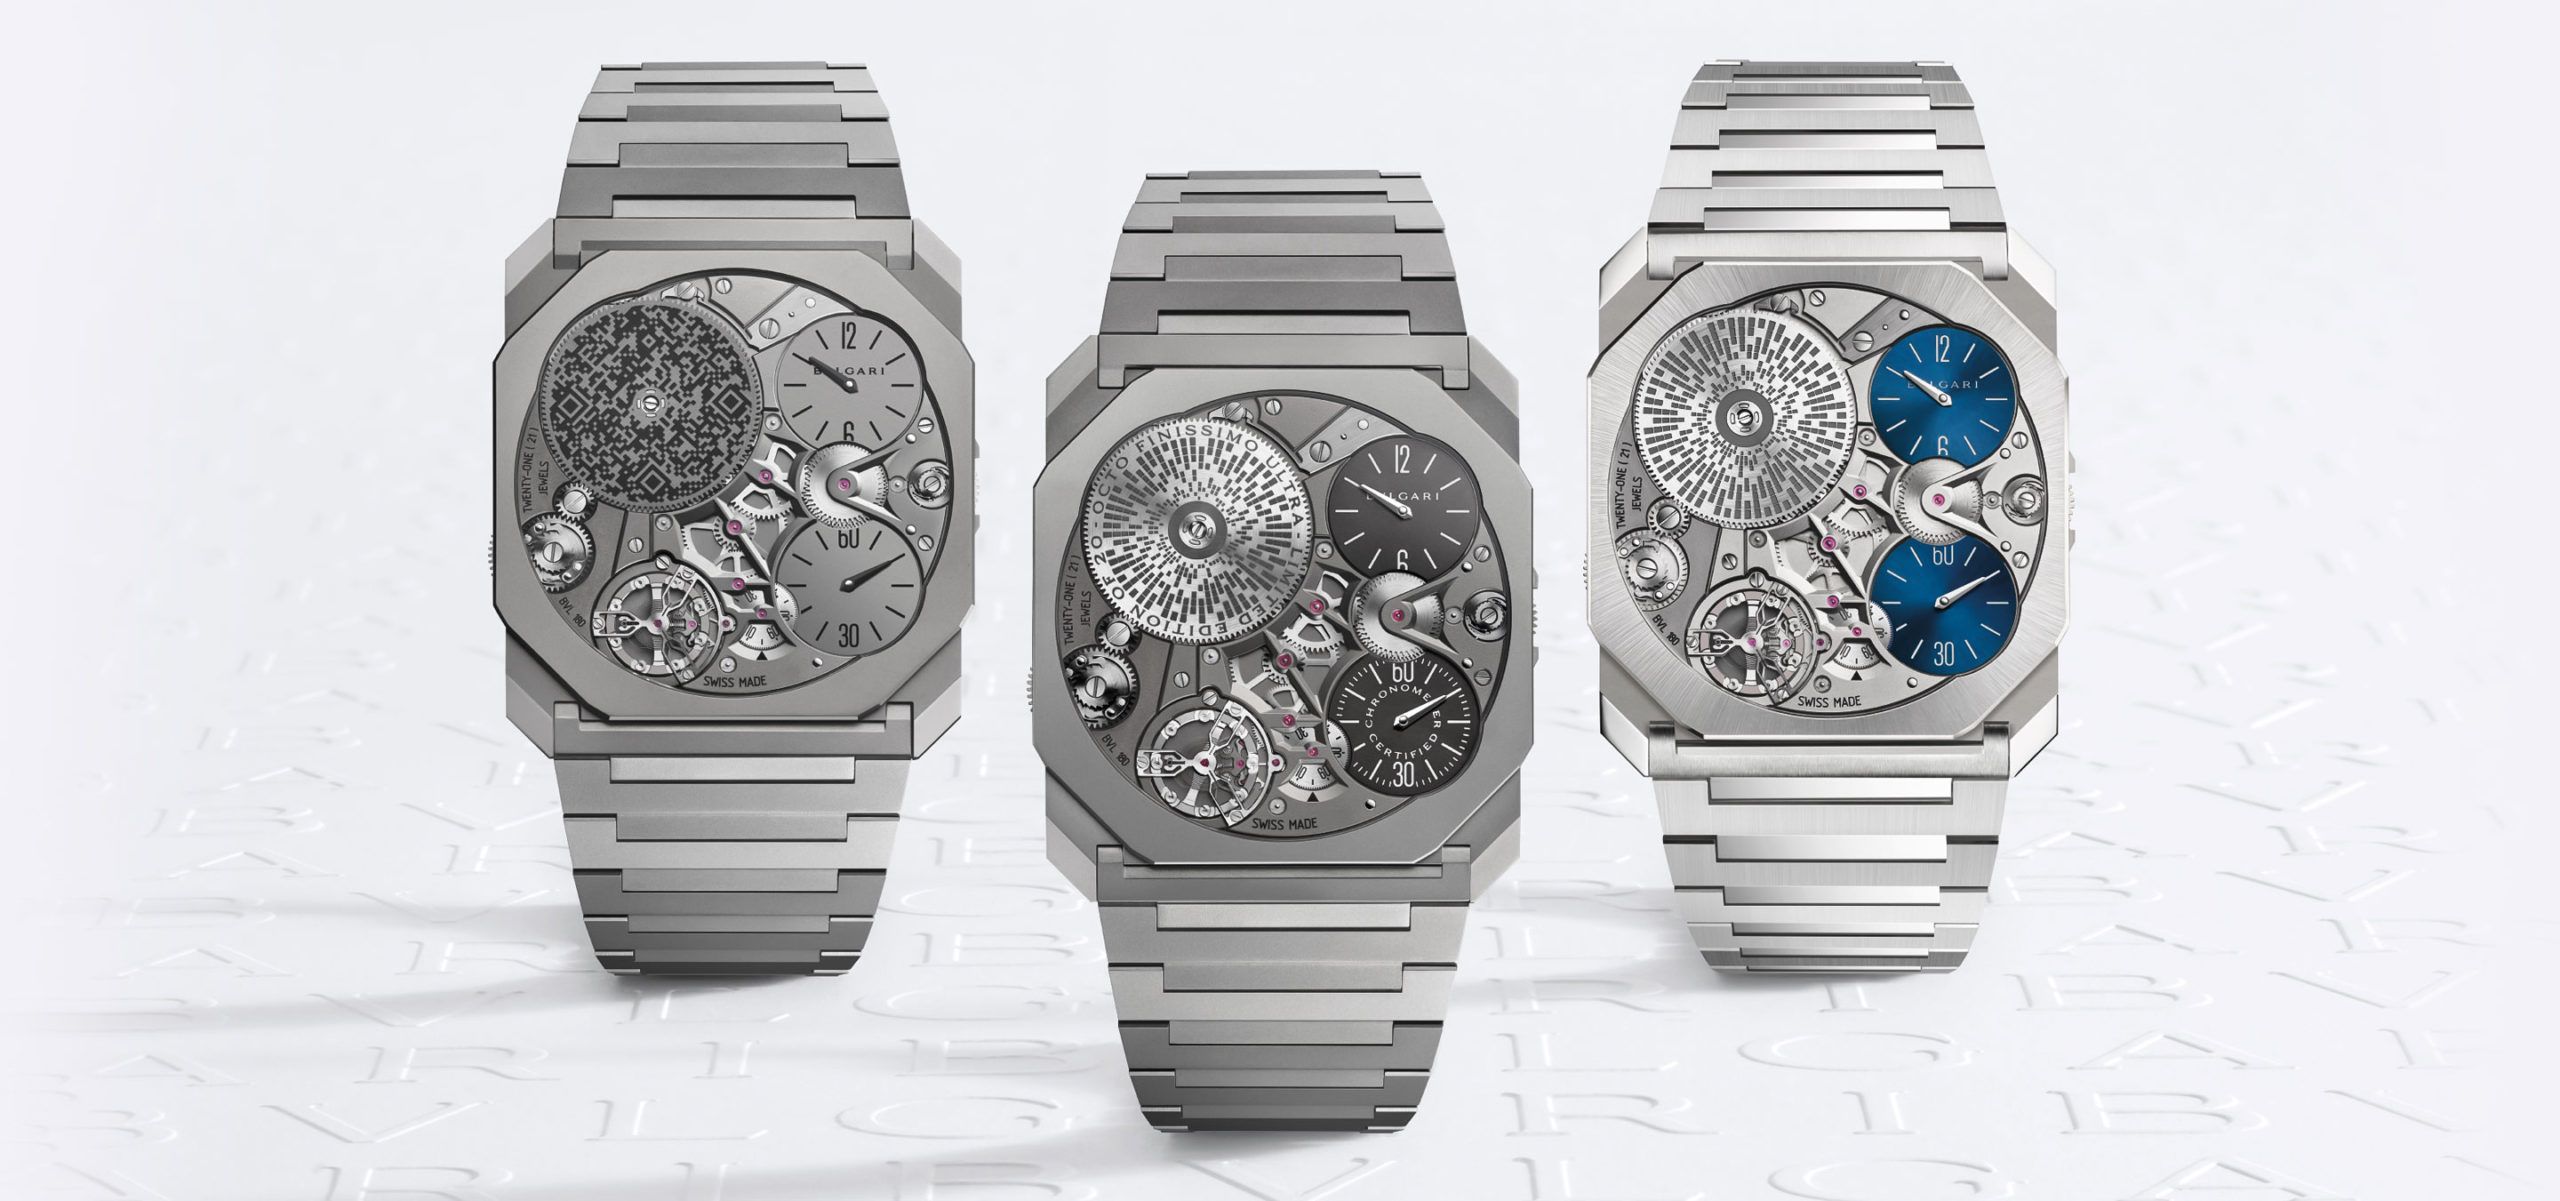 Pushing The Boundaries: Bulgari Set Another World Record With The Octo Finissimo Ultra COSC